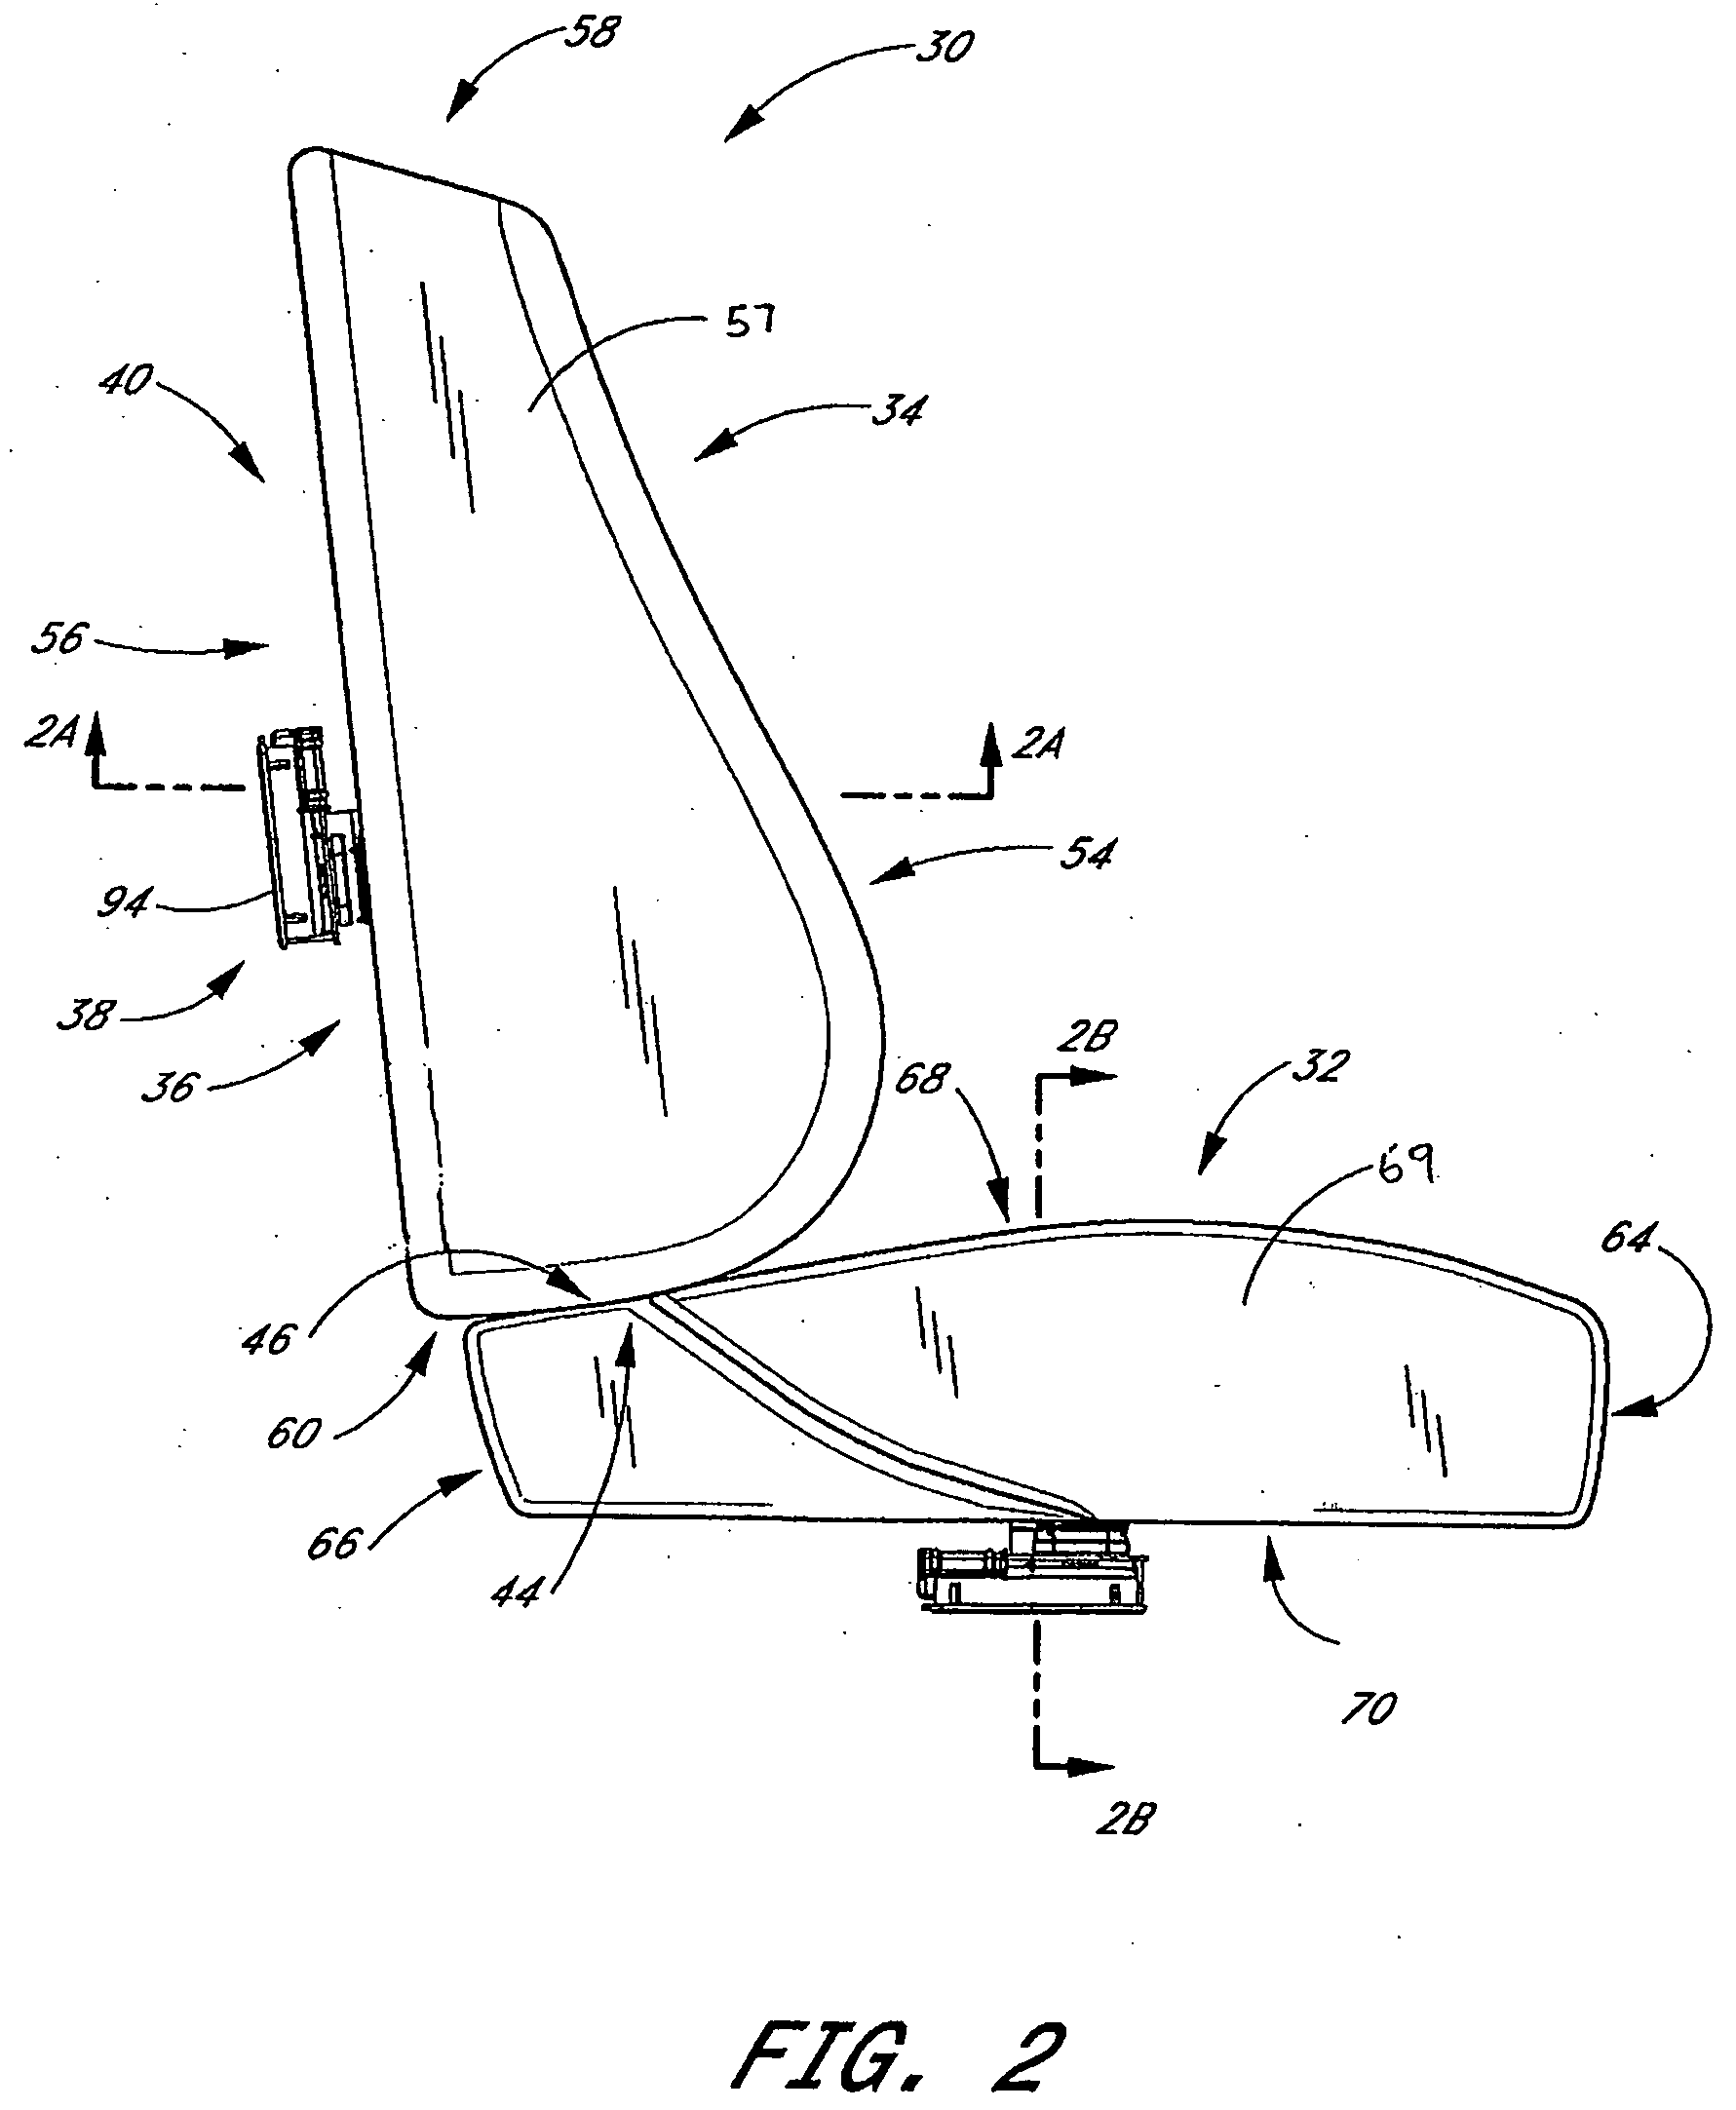 Control system for thermal module vehicle